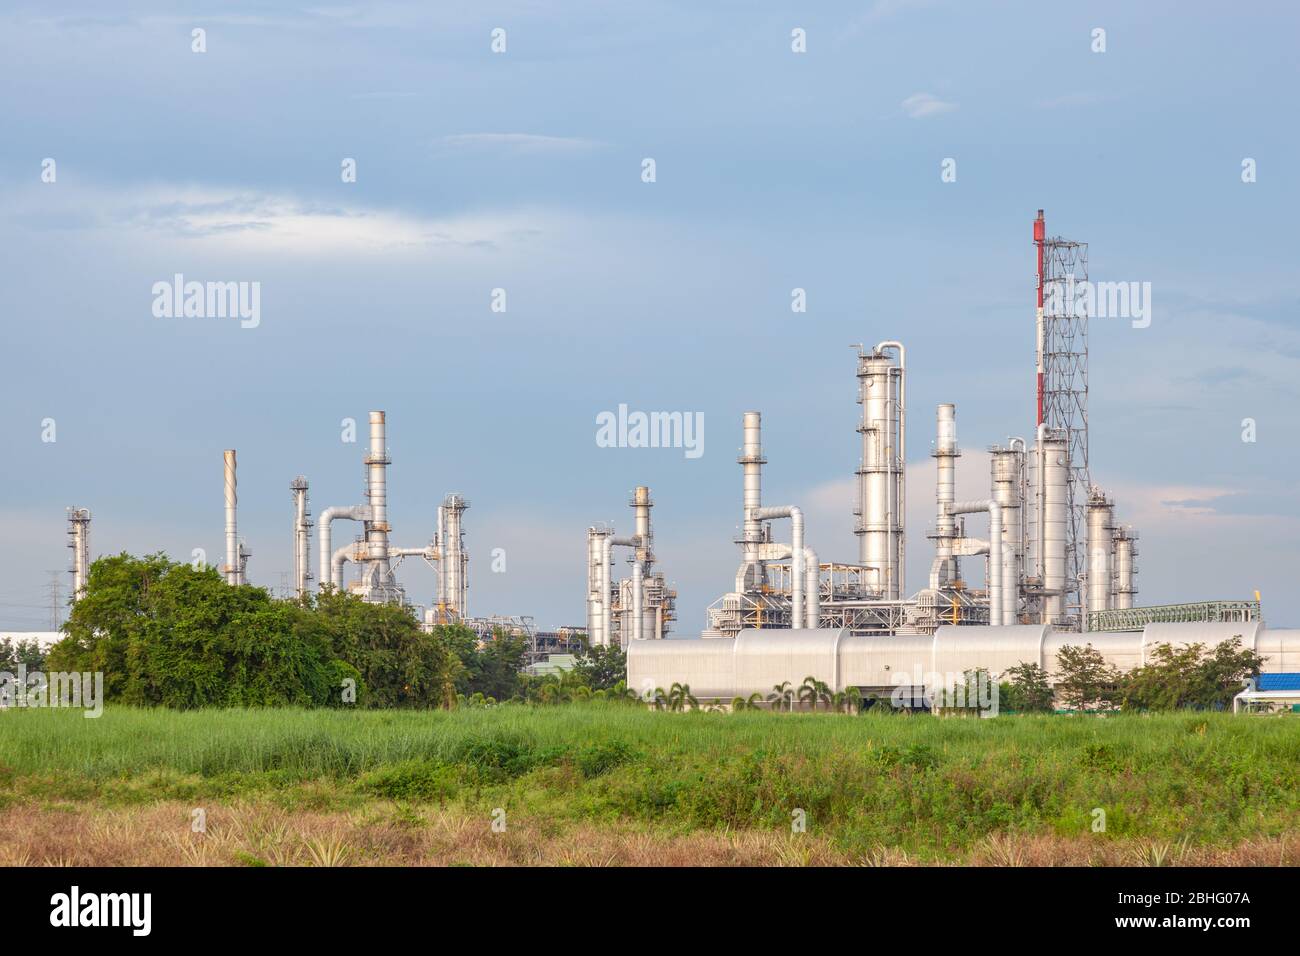 Oil refinery industrial factory Stock Photo